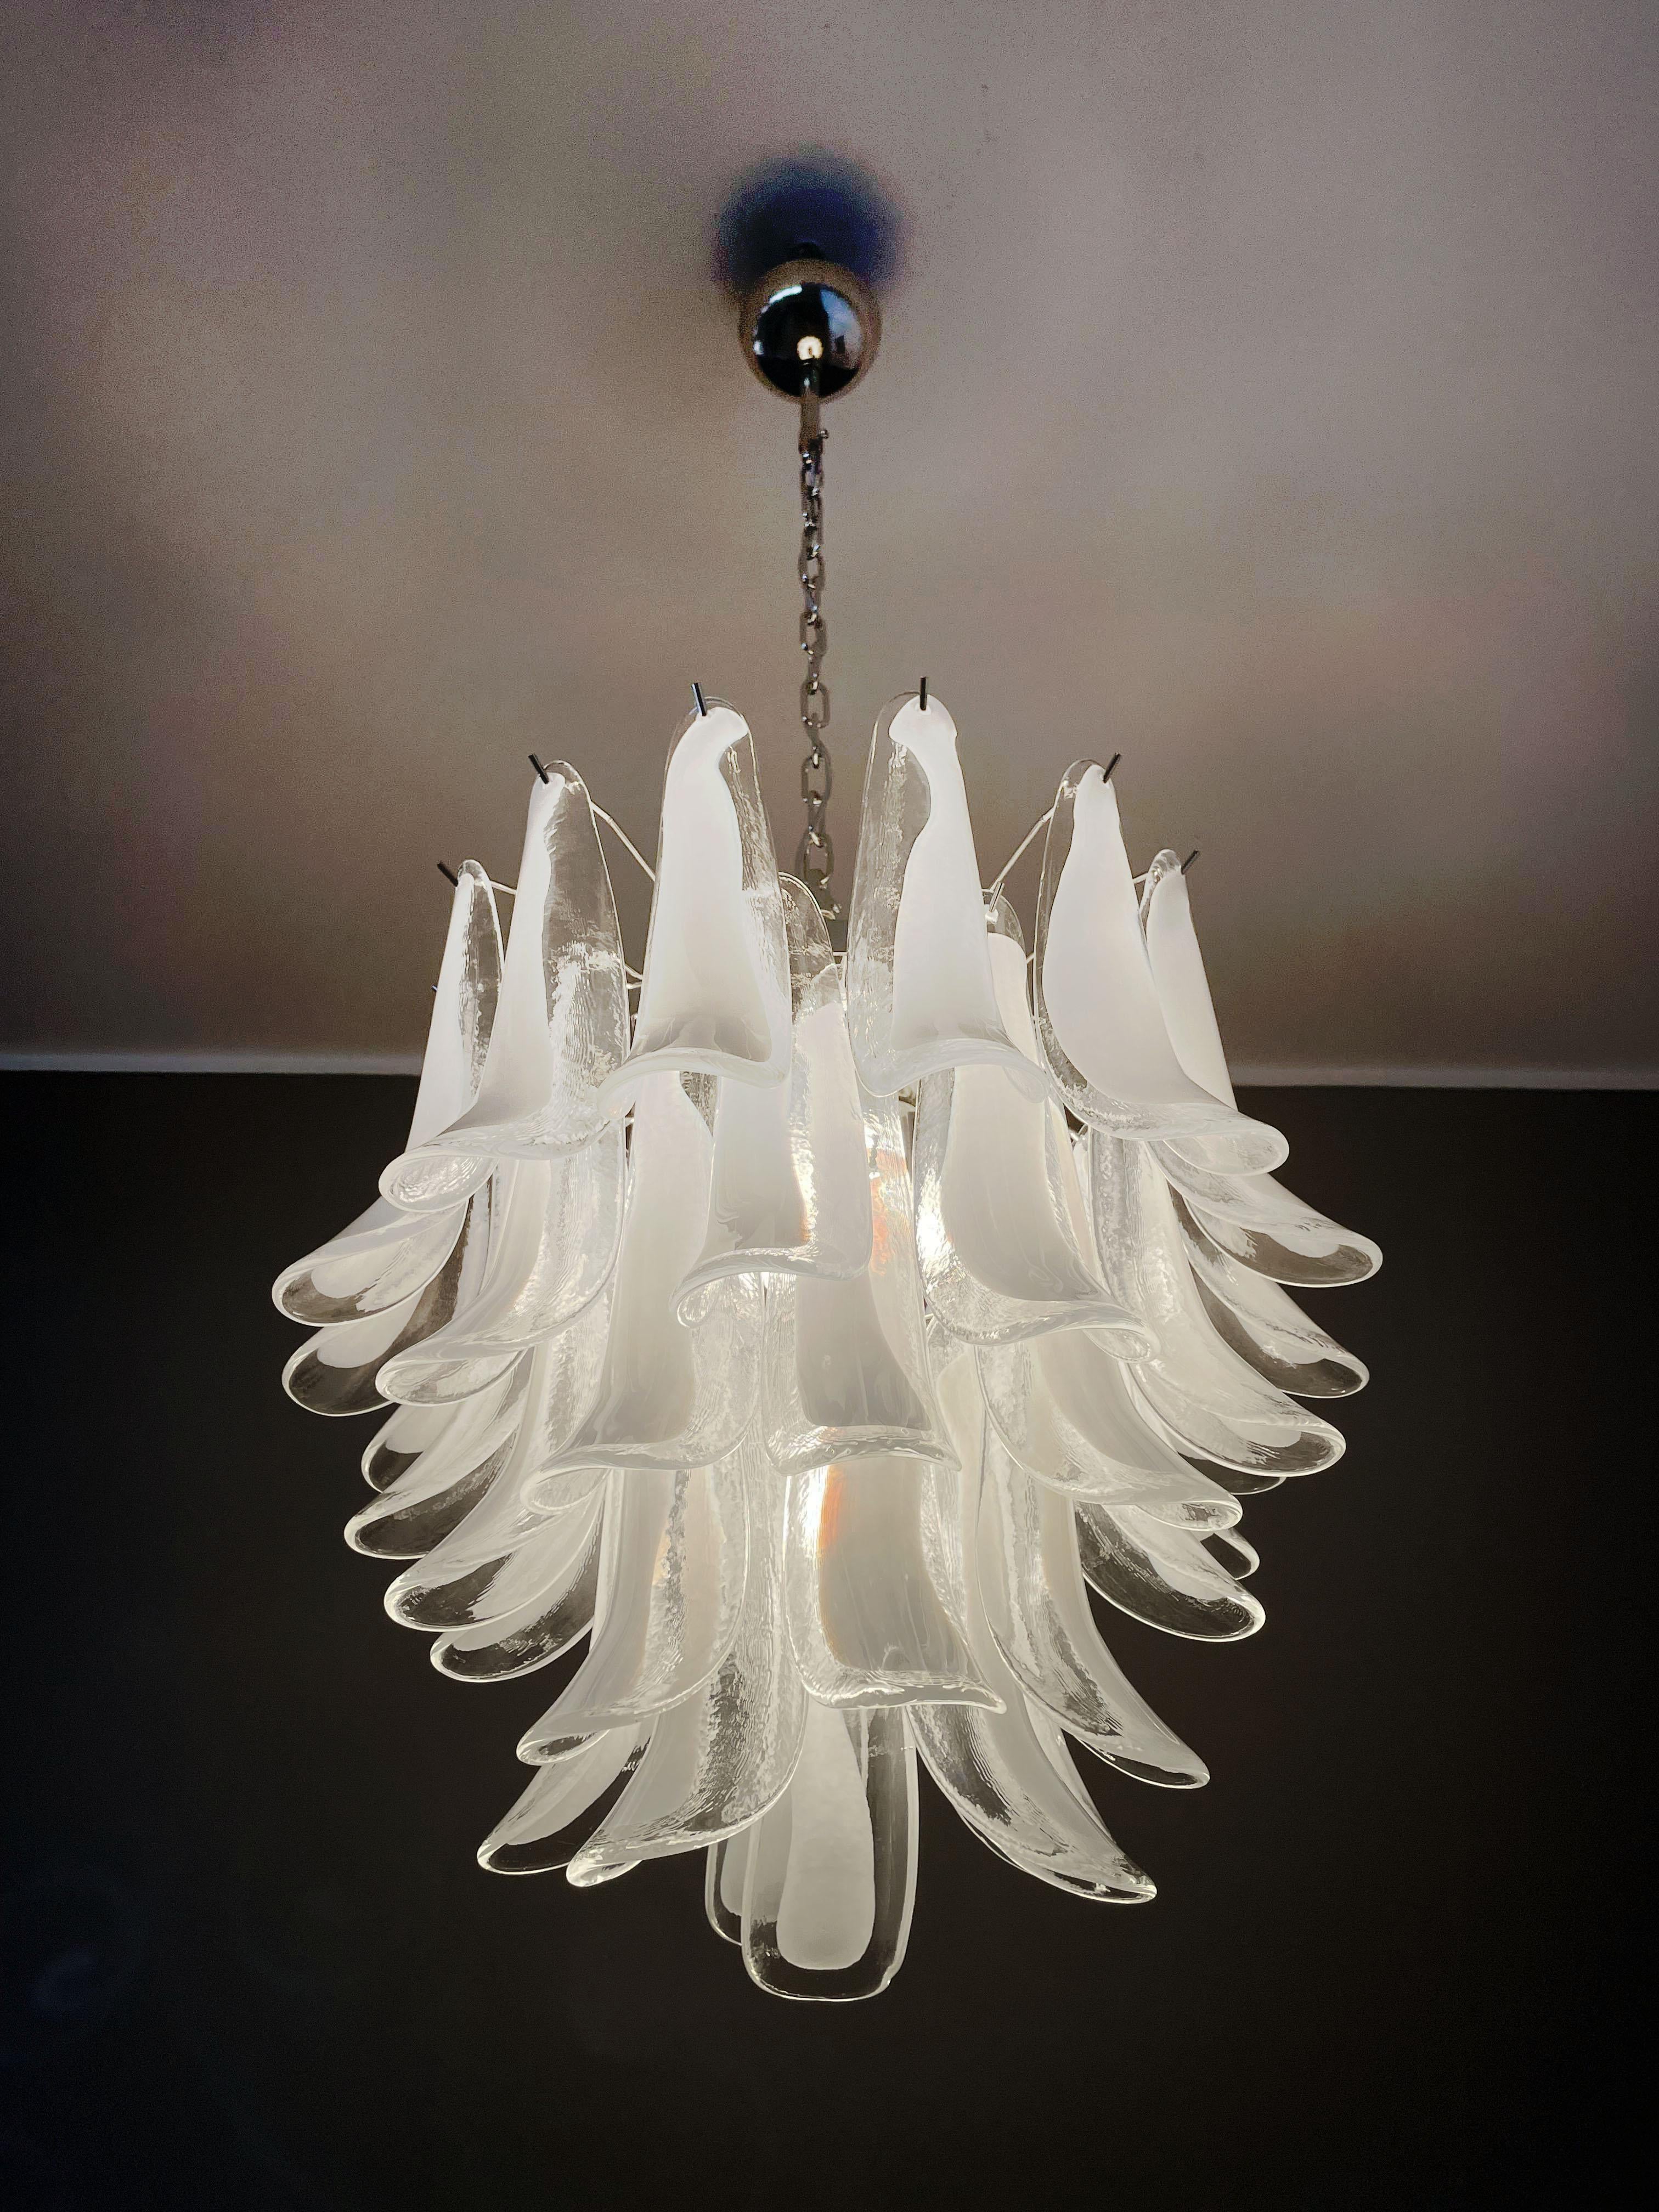 Italian vintage Murano chandelier in the manner of Mazzega - 41 glass petals For Sale 5